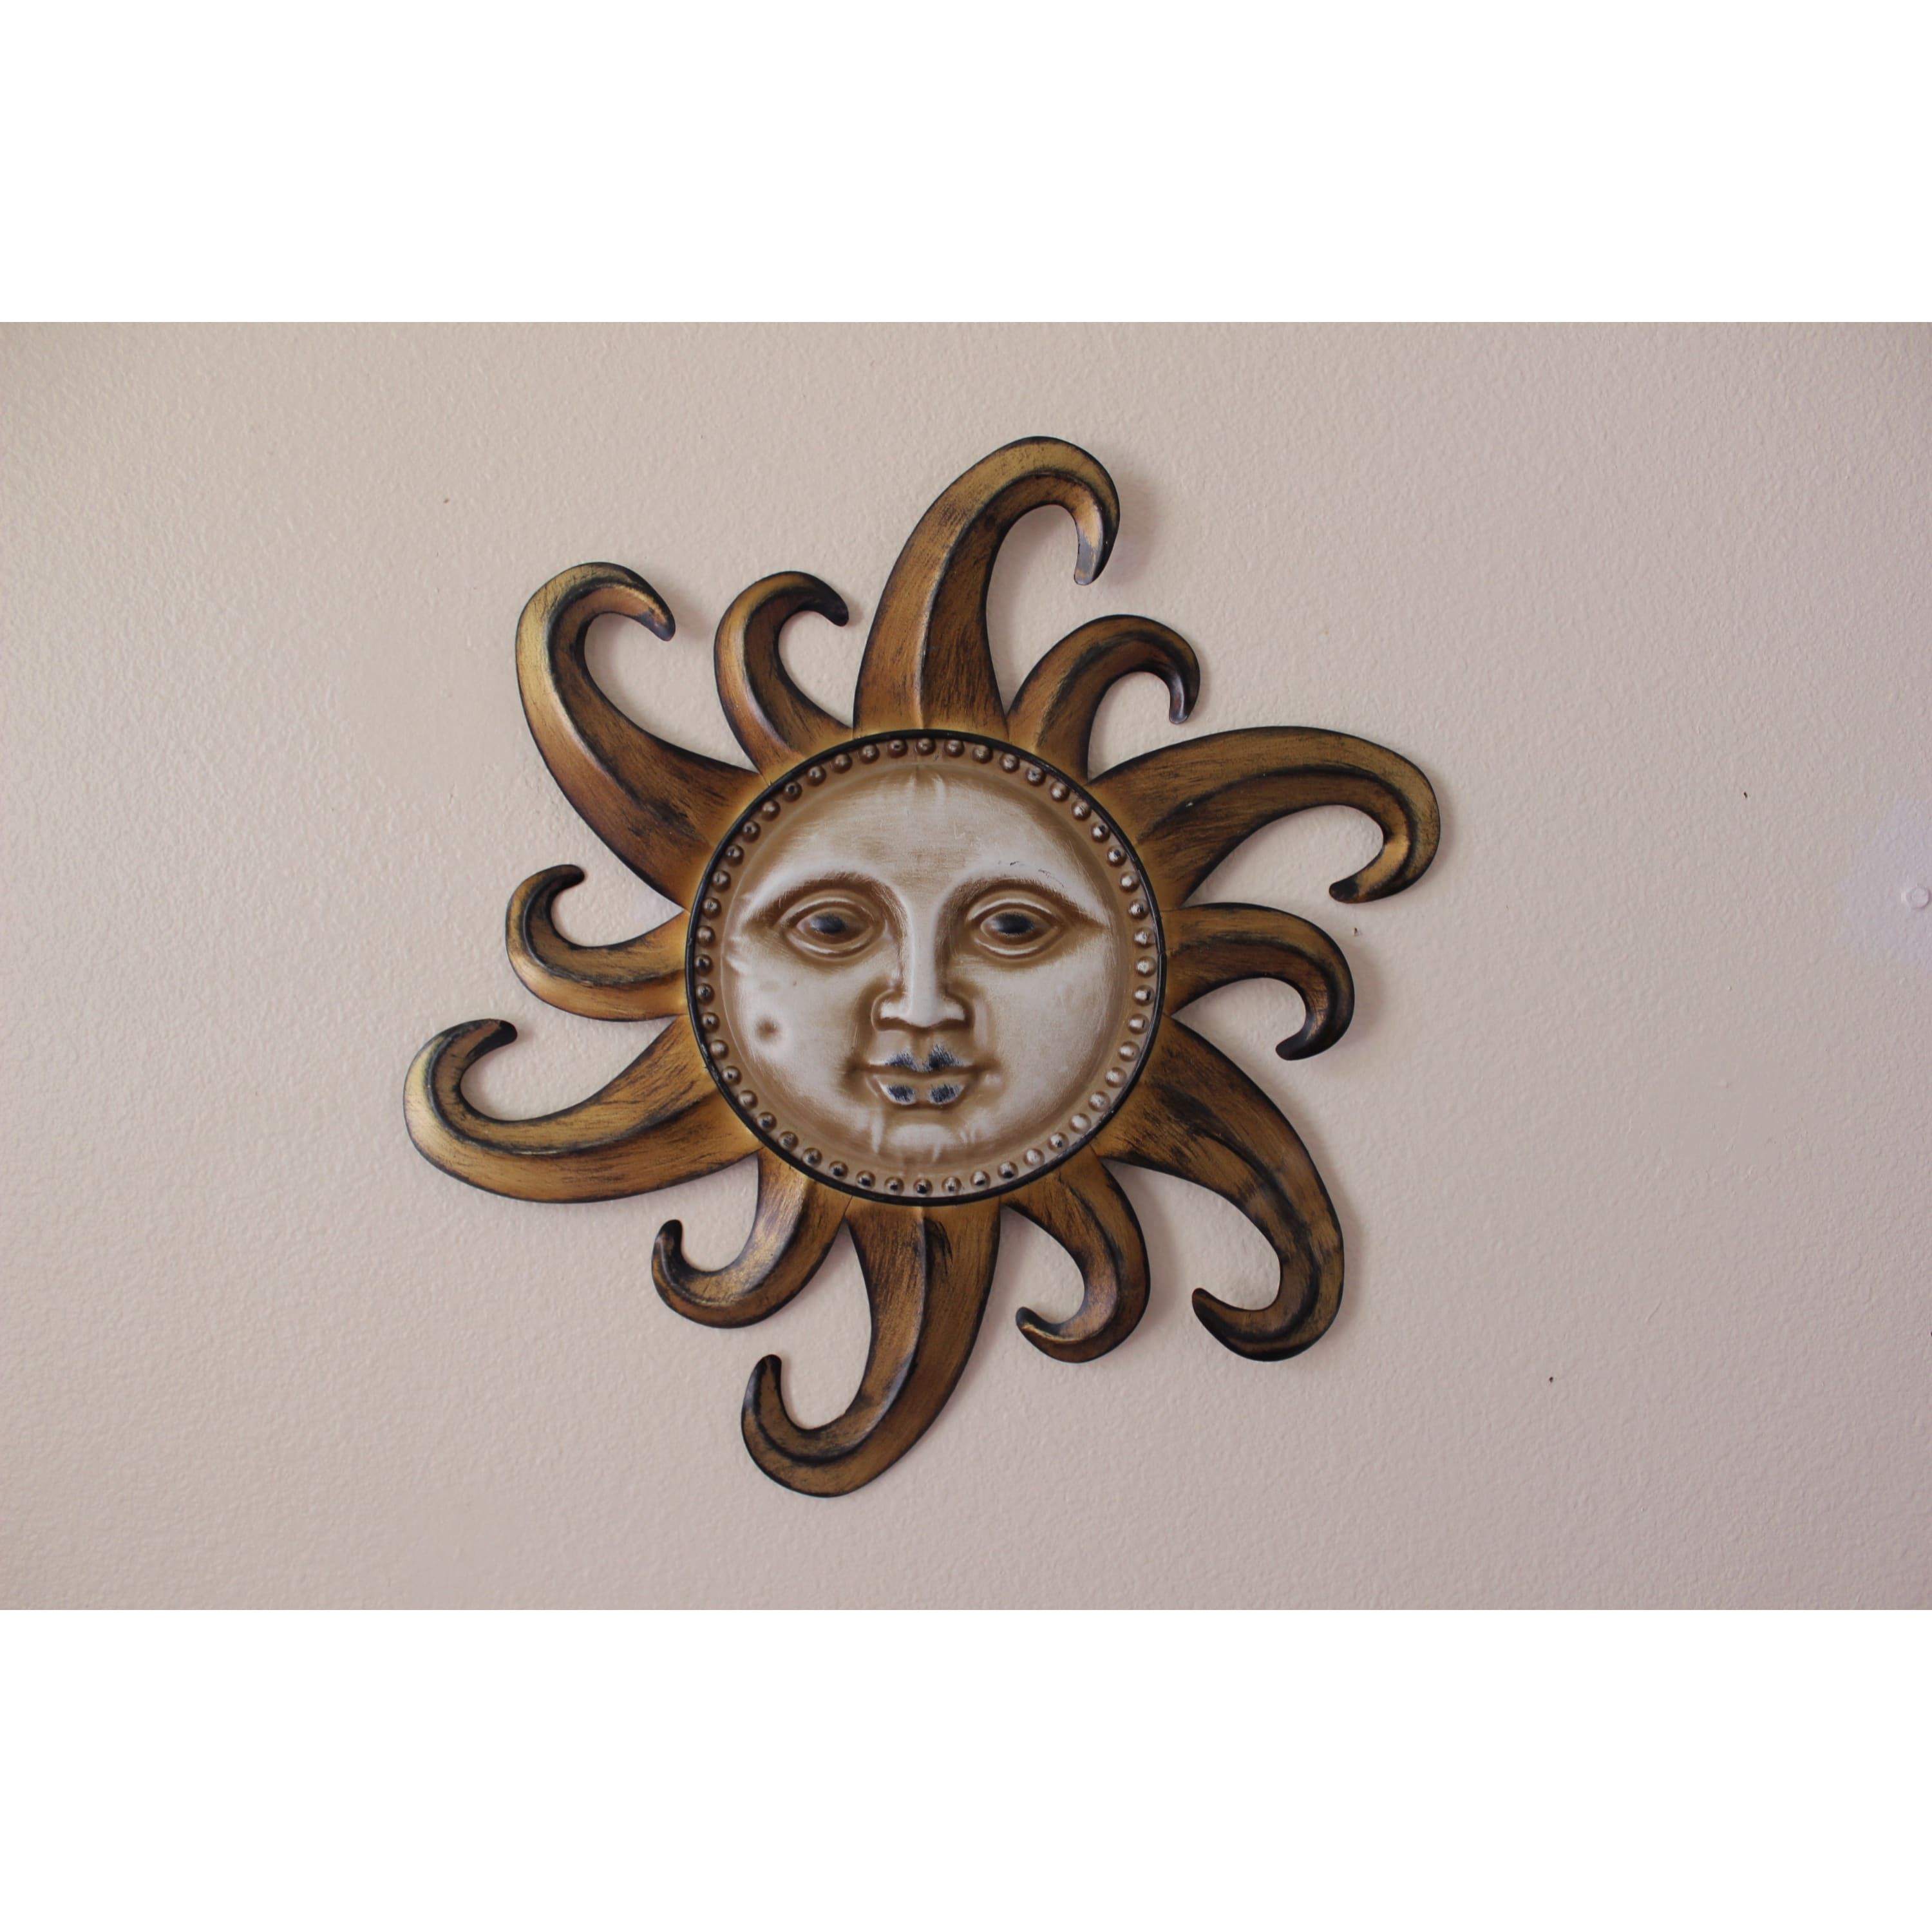 Sun Face, Sun Wall Hanging, Metal Wall Hanging, Patio Decor, Porch Decor |  Pink Horse Florida Intended For Most Popular Sun Face Metal Wall Art (Gallery 16 of 20)